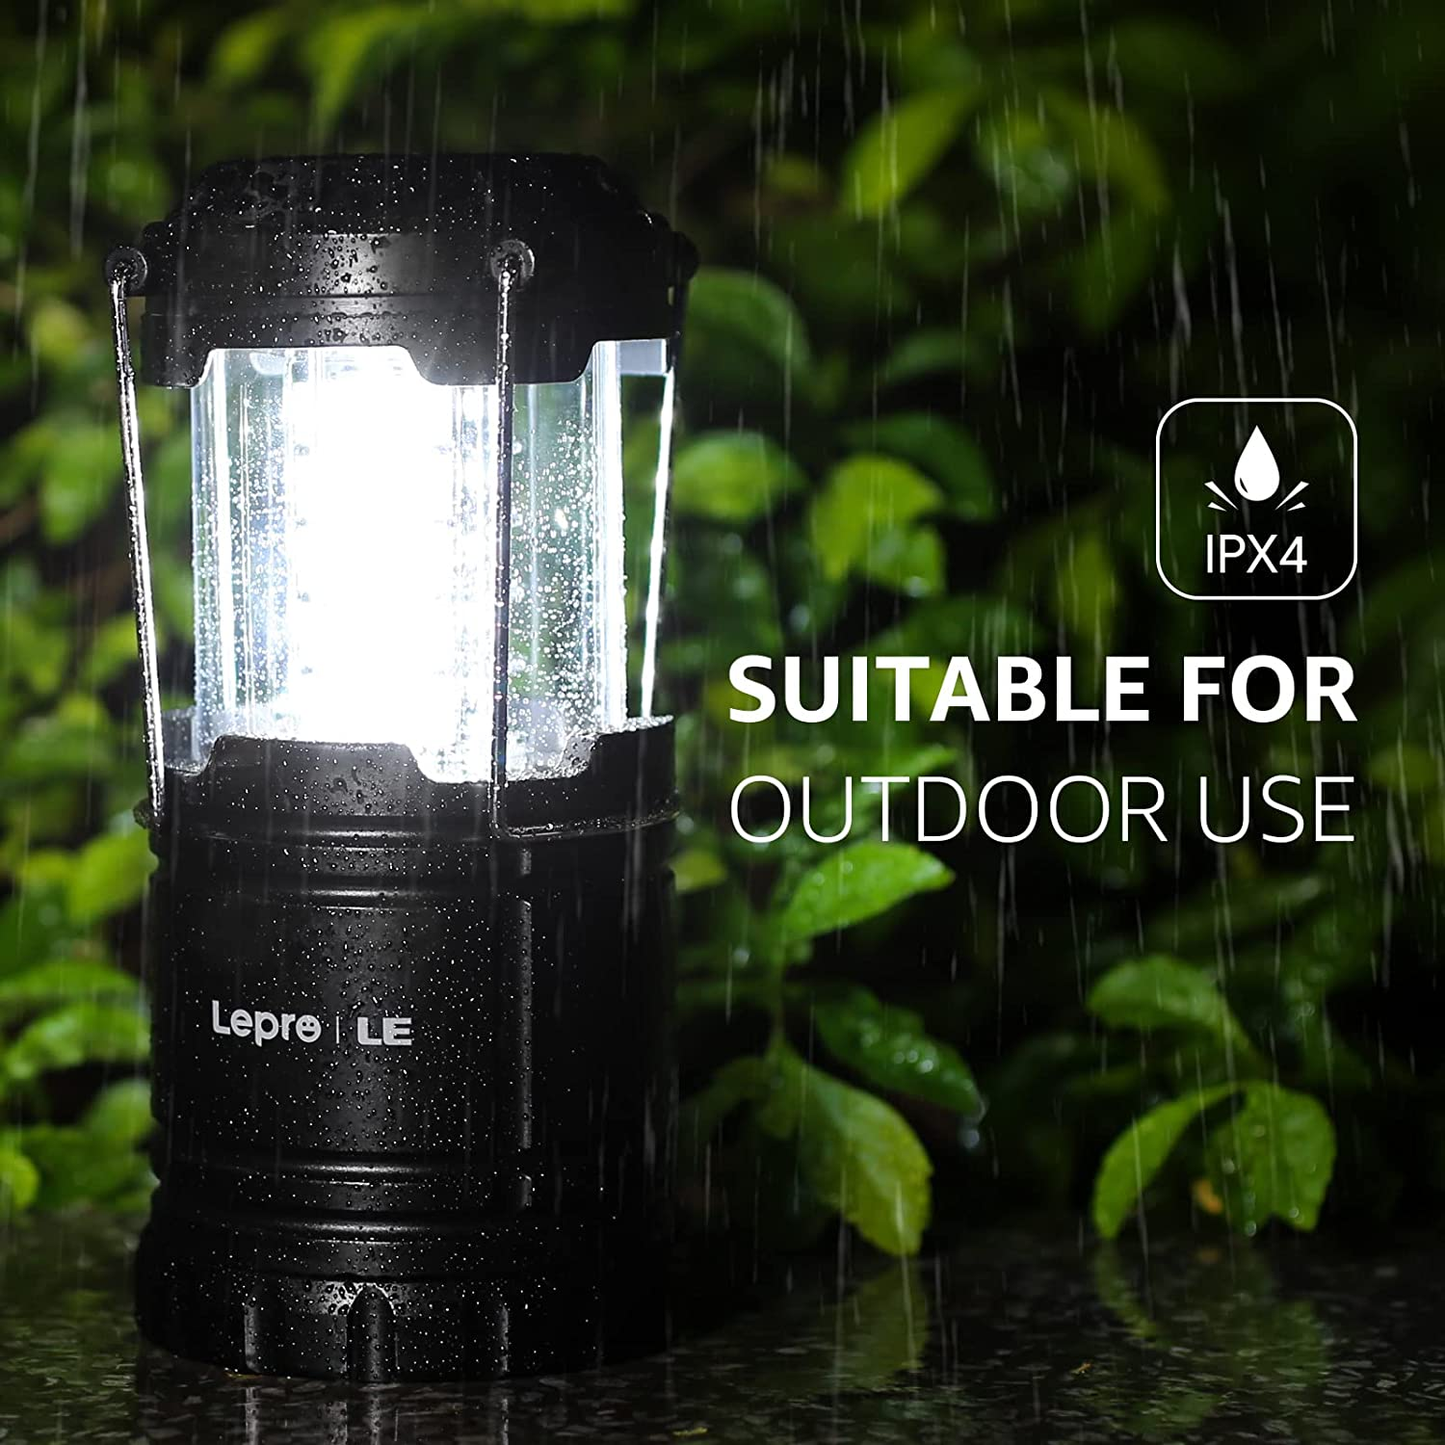 LED Camping Lantern Battery Powered, Super Bright, Collapsible, IPX4 Water Resistant, Outdoor Portable Lights for Emergency, Hurricane, Storms, Outages, 4 Packs